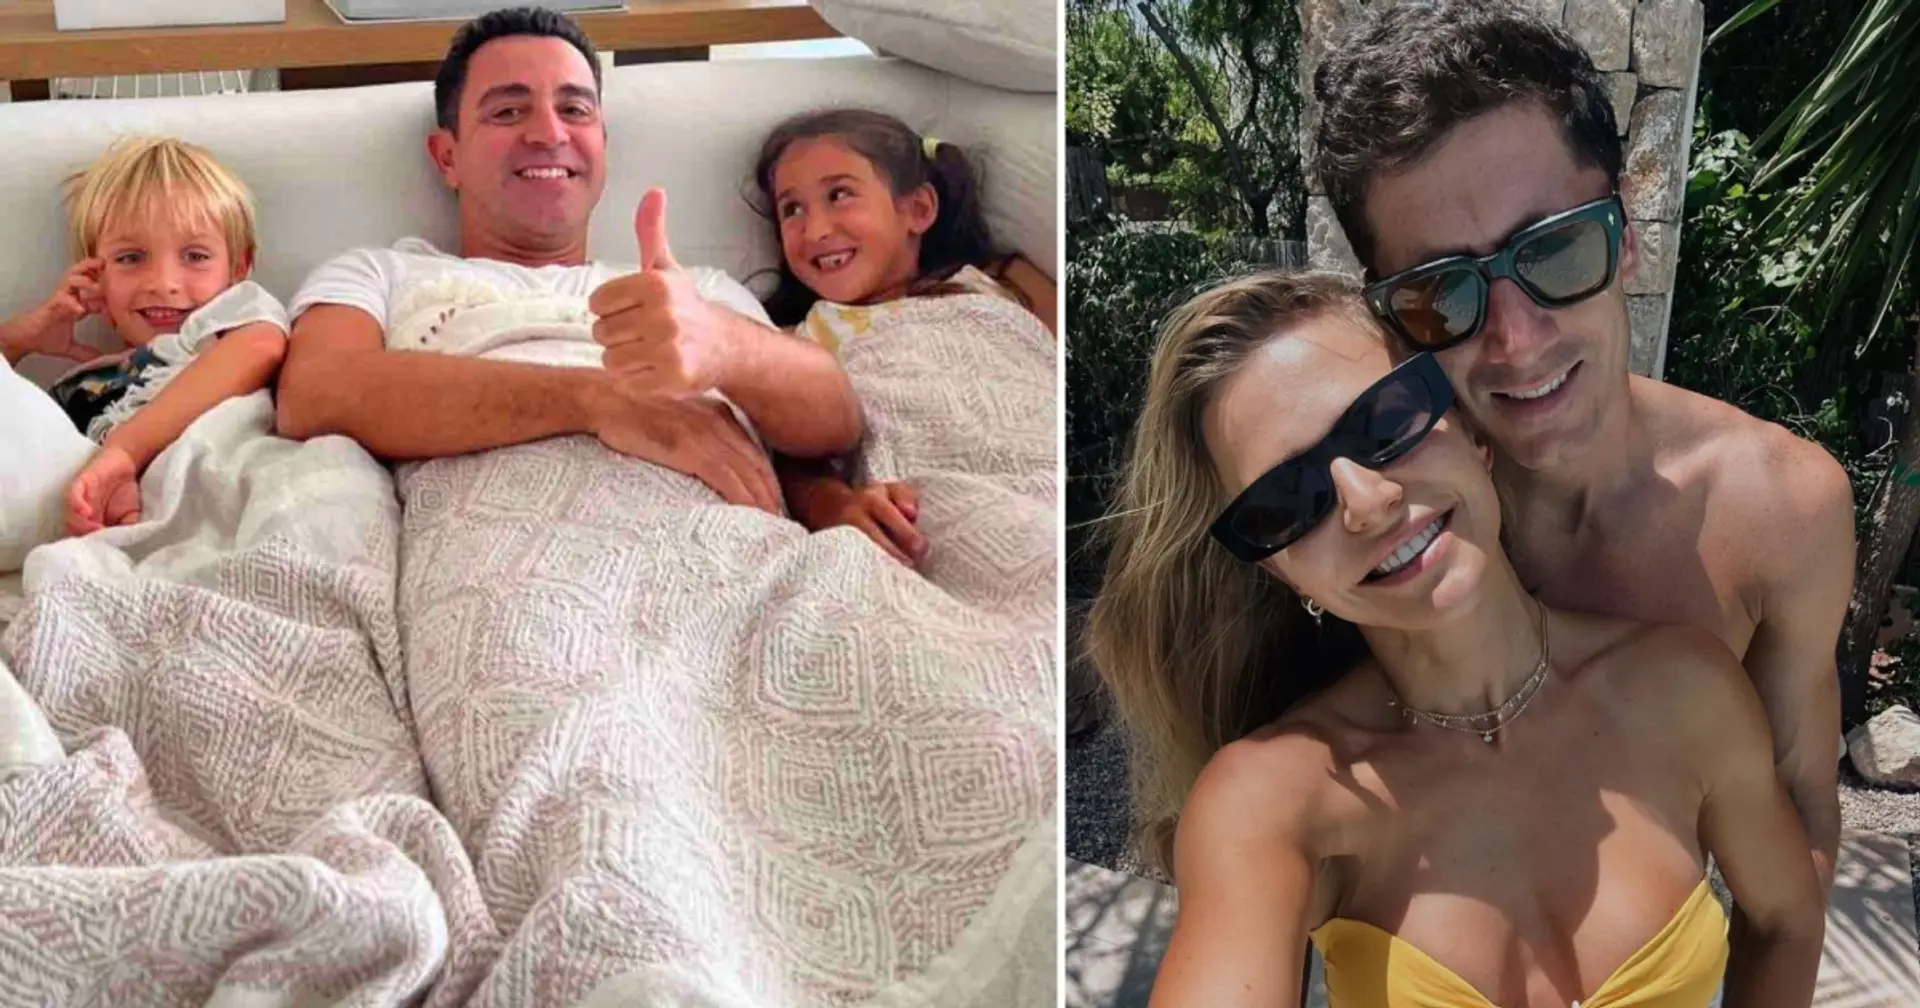 Family time: 5 best pics as Barca players enjoy their days off ahead of new season